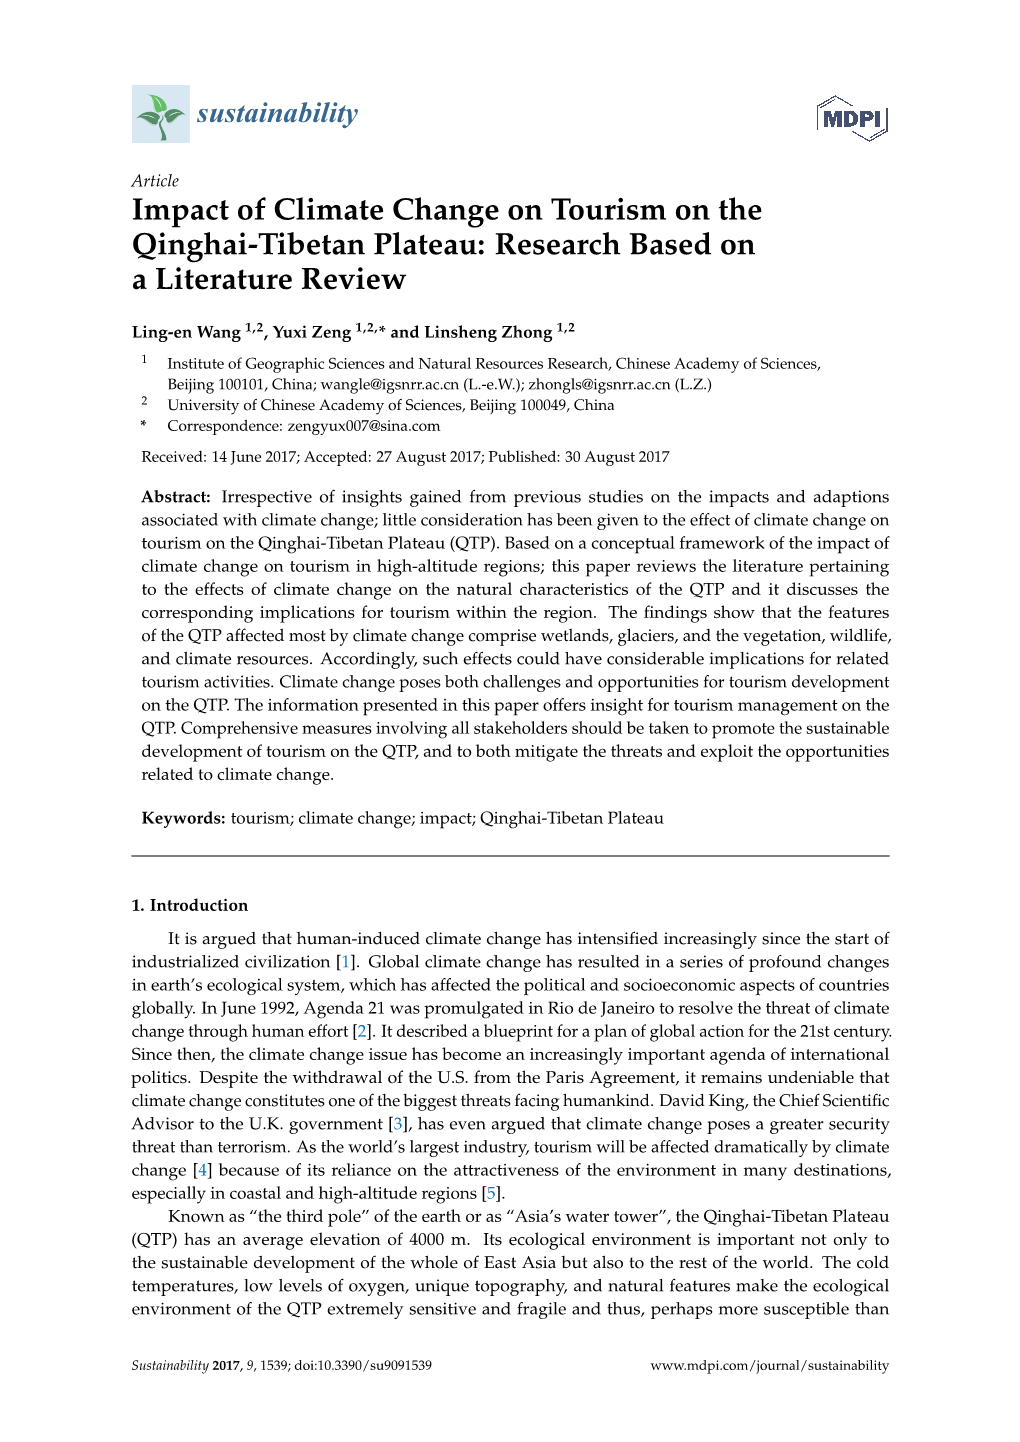 Impact of Climate Change on Tourism on the Qinghai-Tibetan Plateau: Research Based on a Literature Review